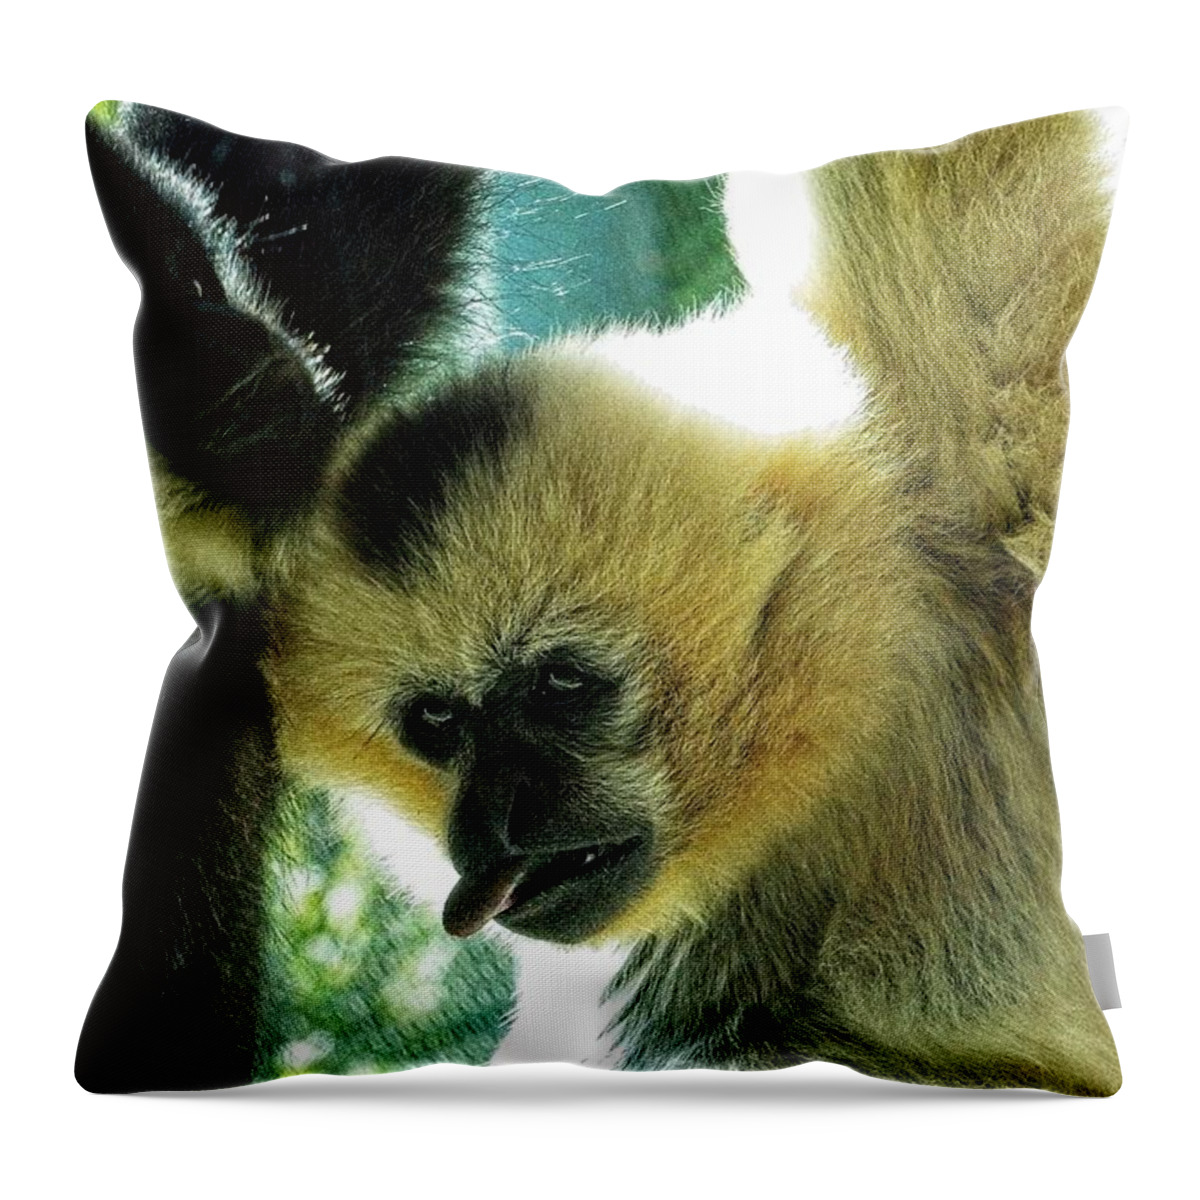 Animal Throw Pillow featuring the photograph Tired Of Hanging by David Desautel